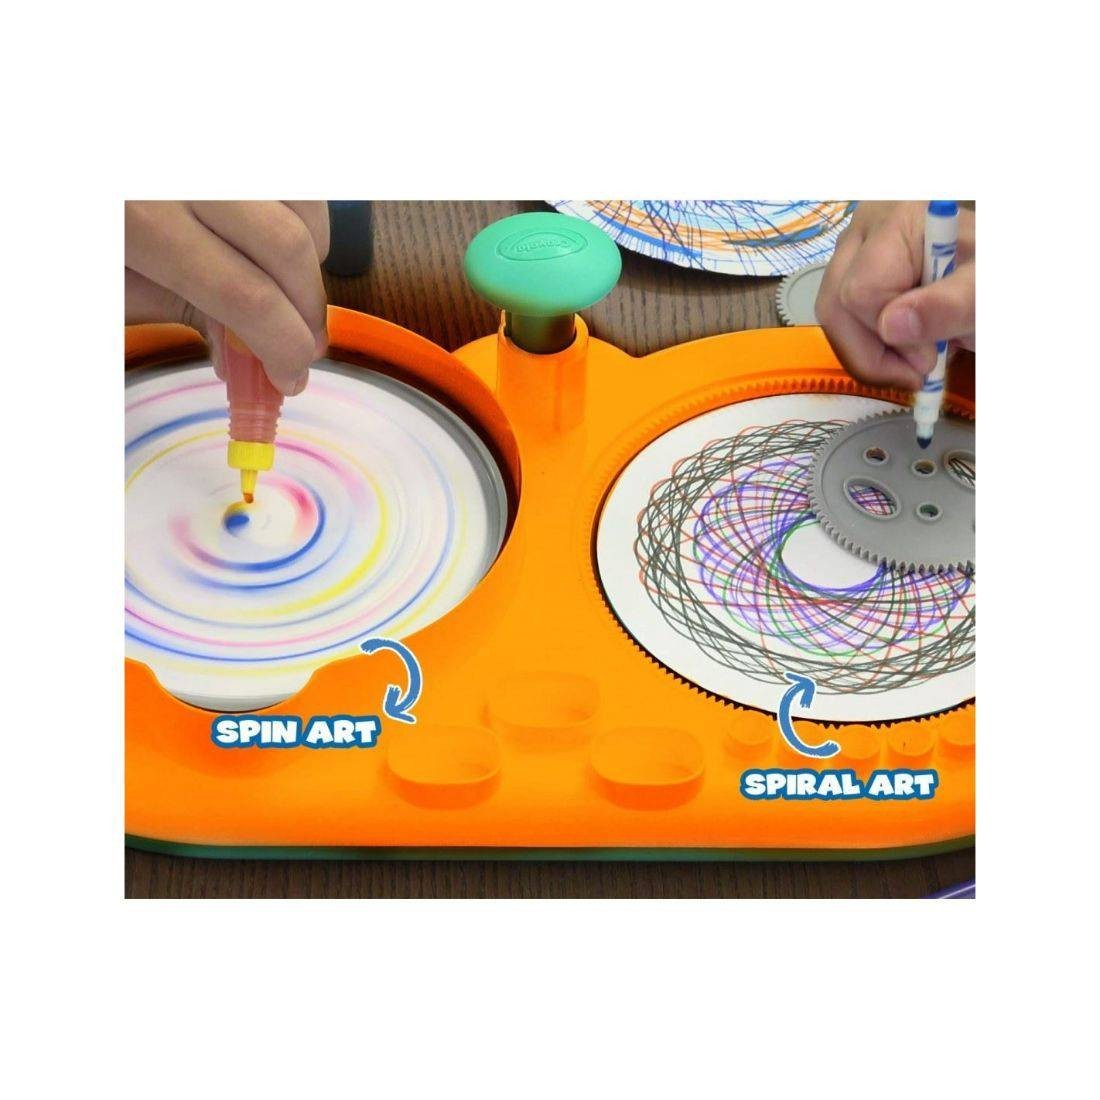 https://theoutfit.me/80421-thickbox_default/crayola-spin-spiral-art-station-deluxe-edition.jpg